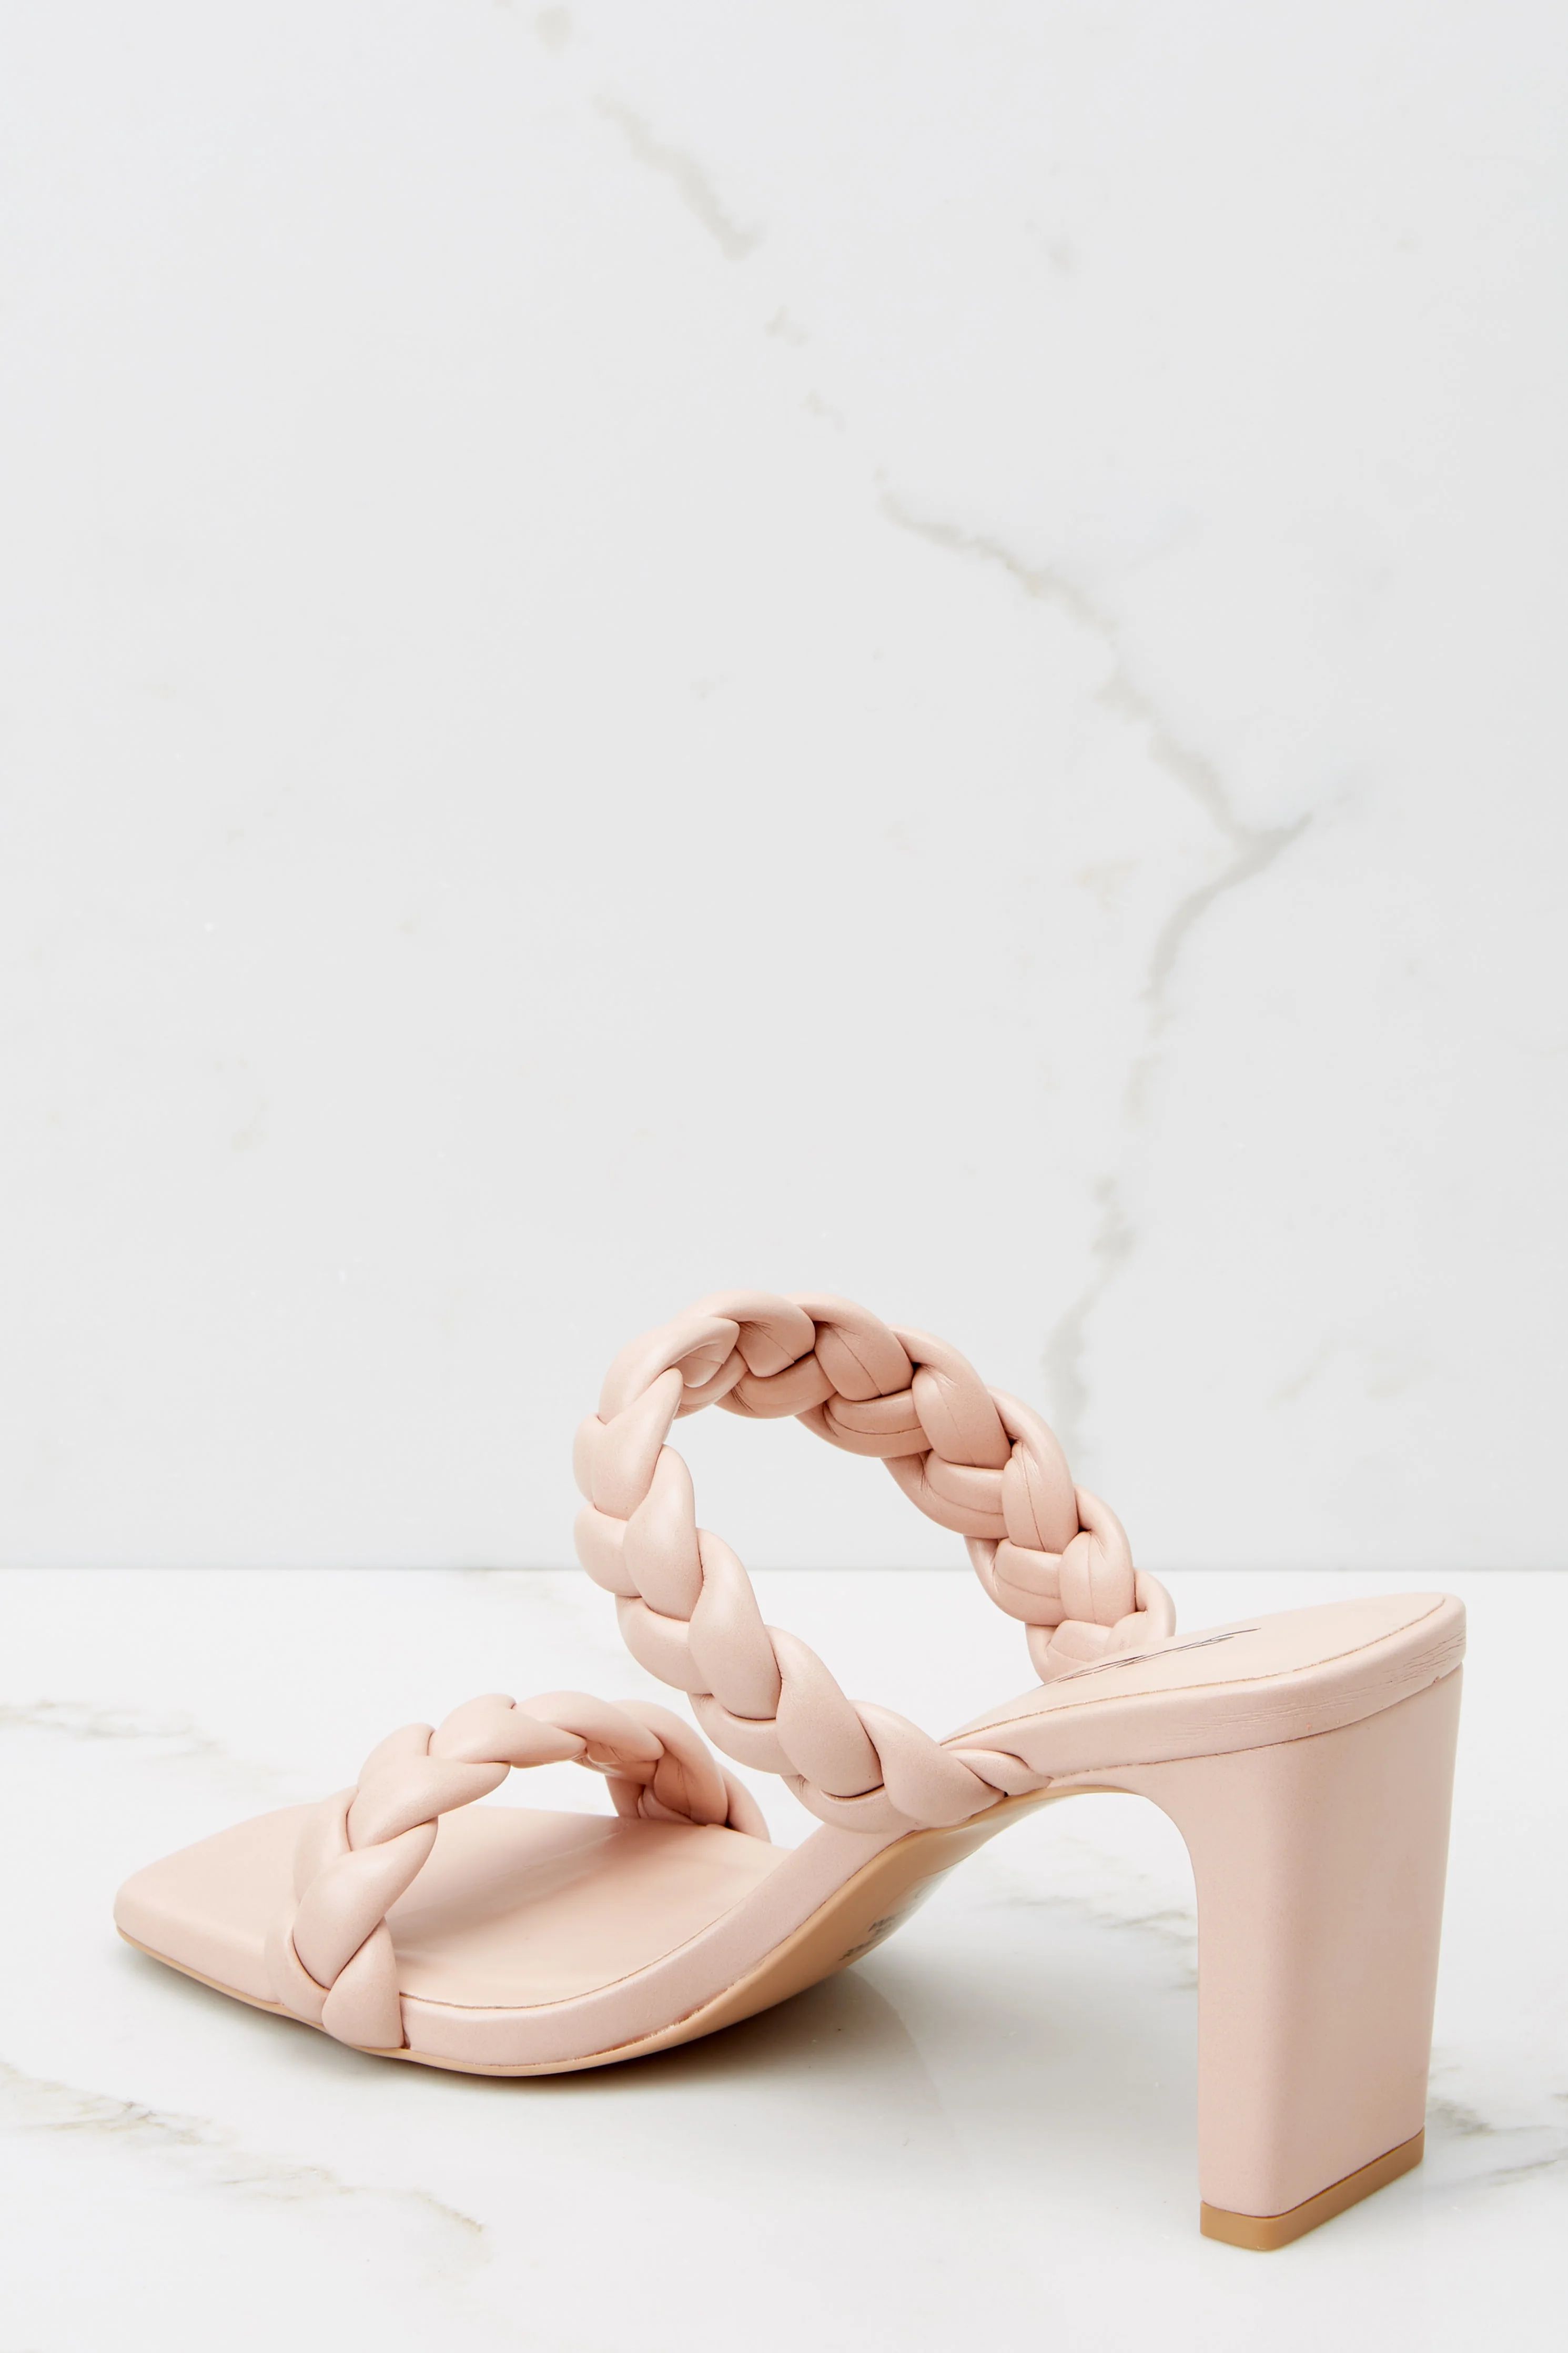 The Final Step Nude Blush Braided Heels | Red Dress 